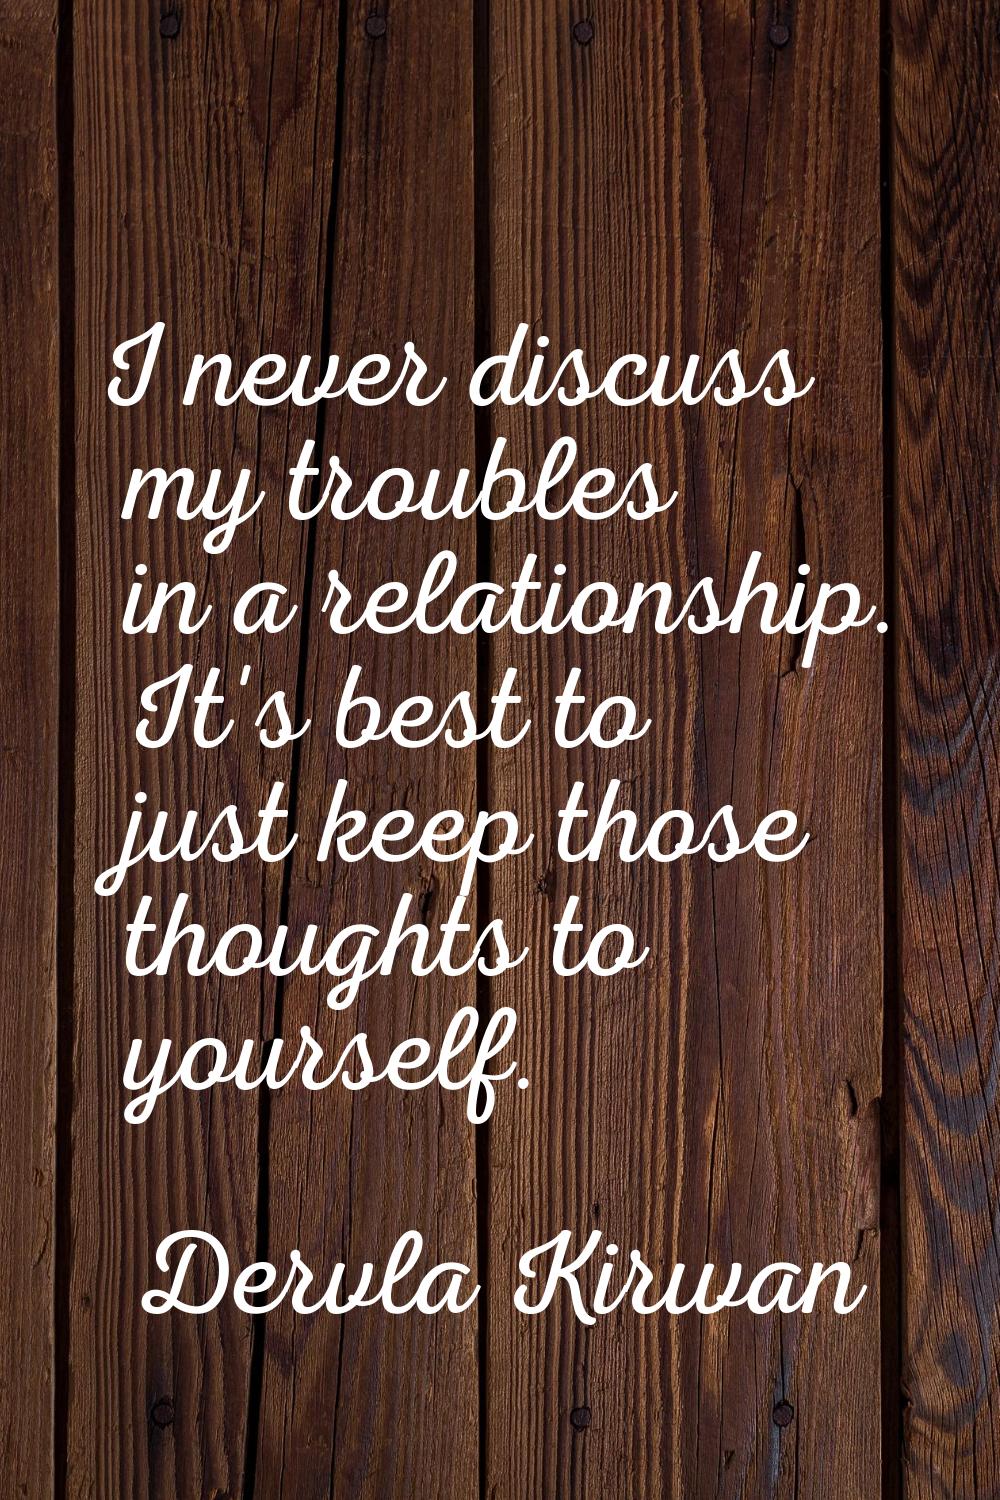 I never discuss my troubles in a relationship. It's best to just keep those thoughts to yourself.